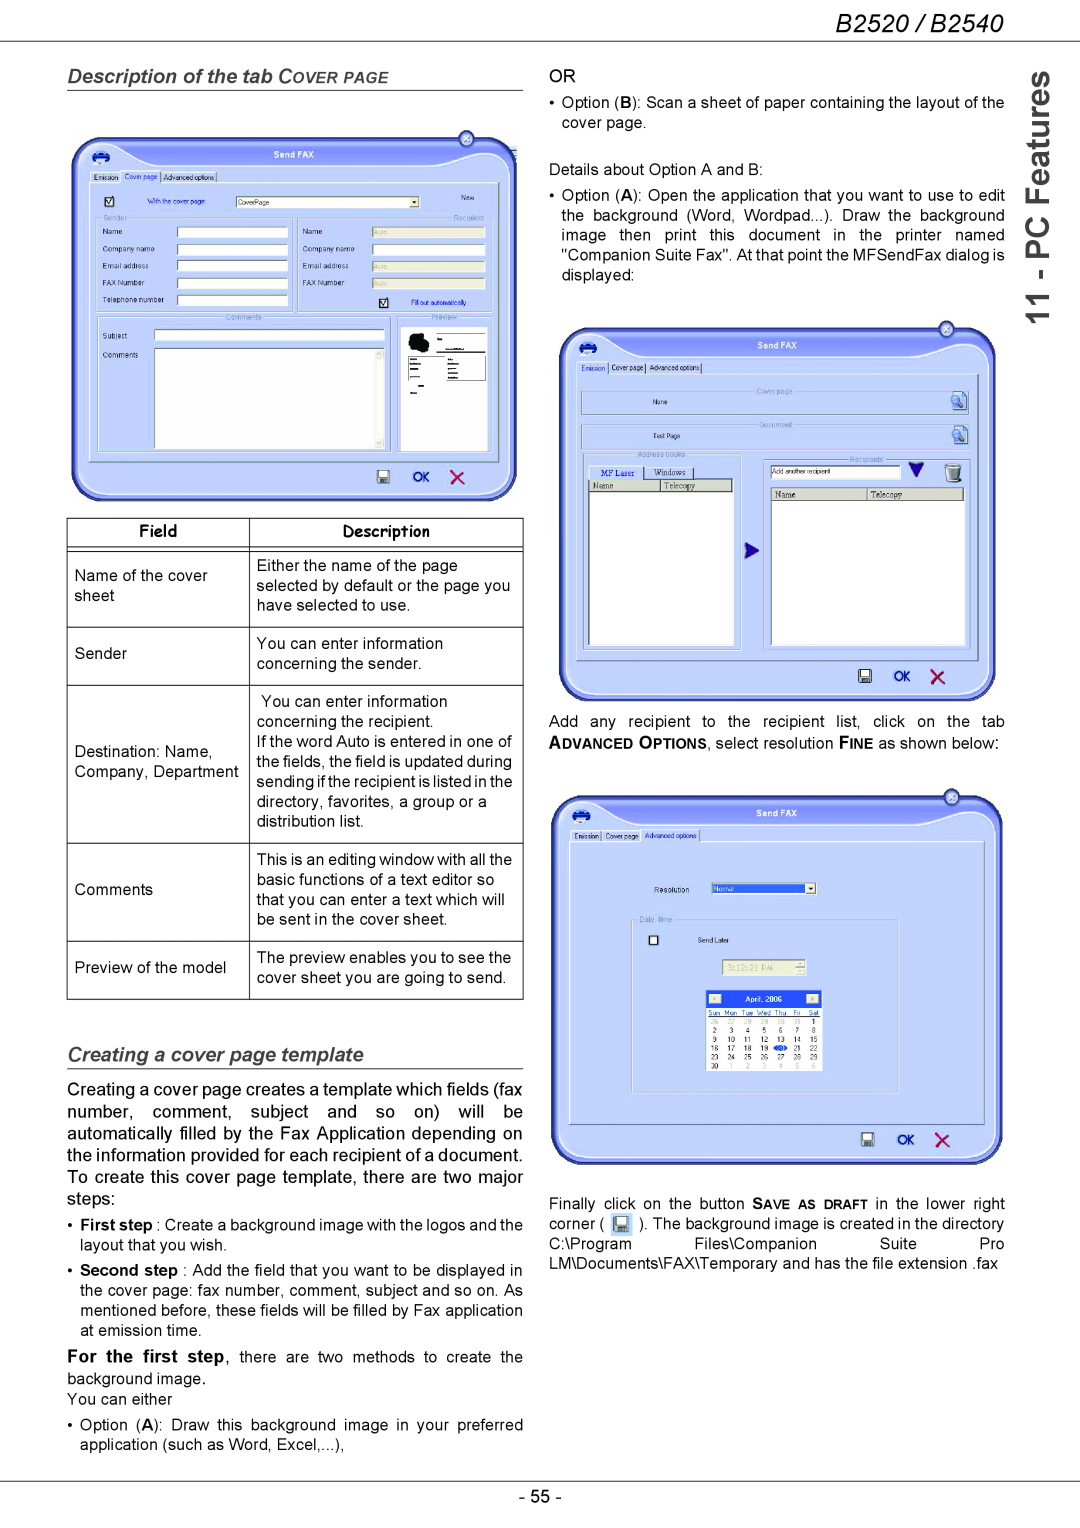 Oki B2500 Series Description of the tab COVER PAGE, Creating a cover page template, PC Features, B2520 / B2540, Field 